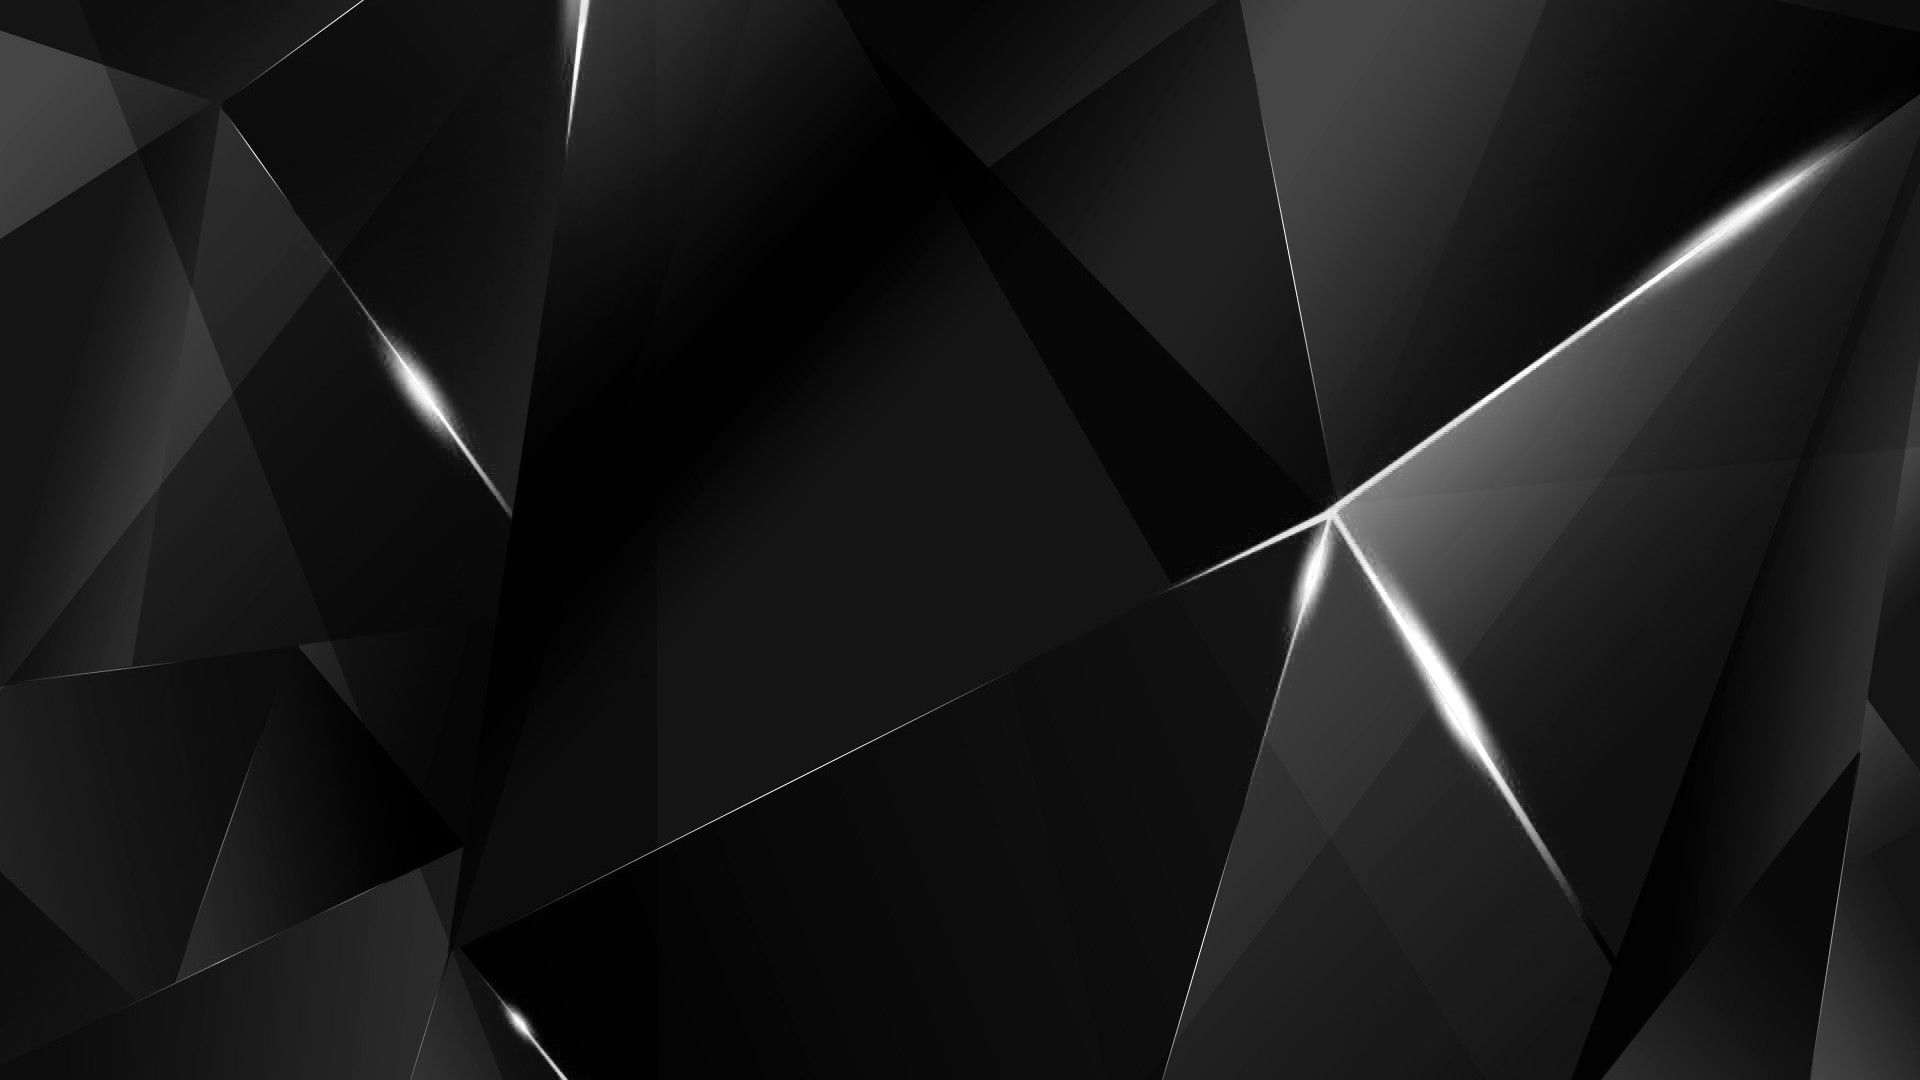 1920x1080 ... Wallpapers - White Abstract Polygons (Black BG) by kaminohunter